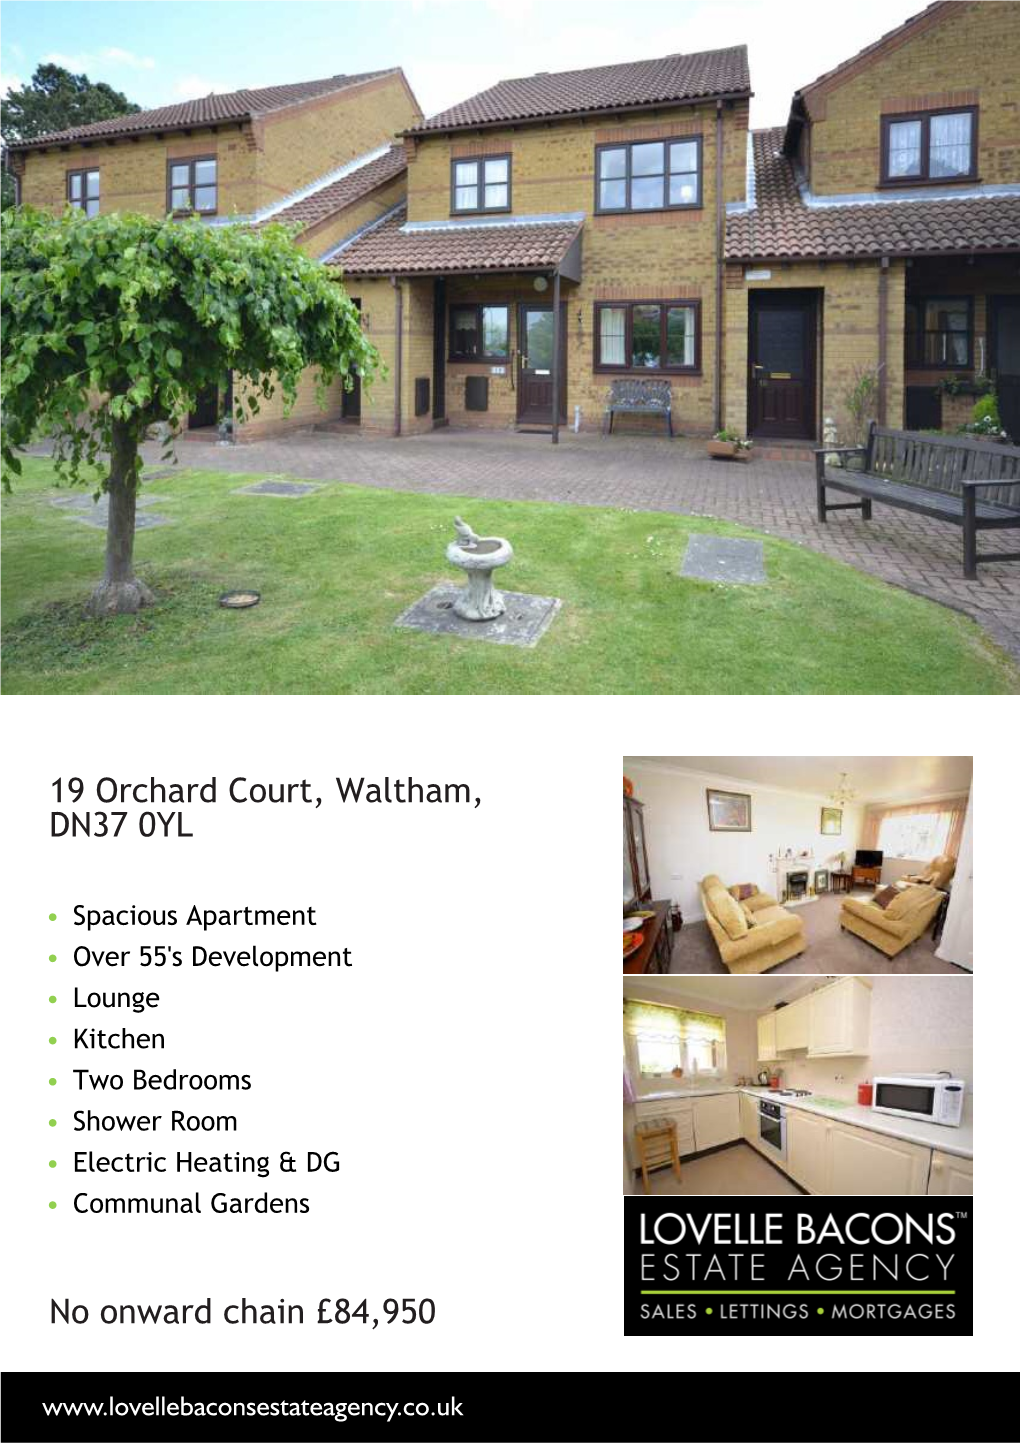 19 Orchard Court, Waltham, DN37 0YL